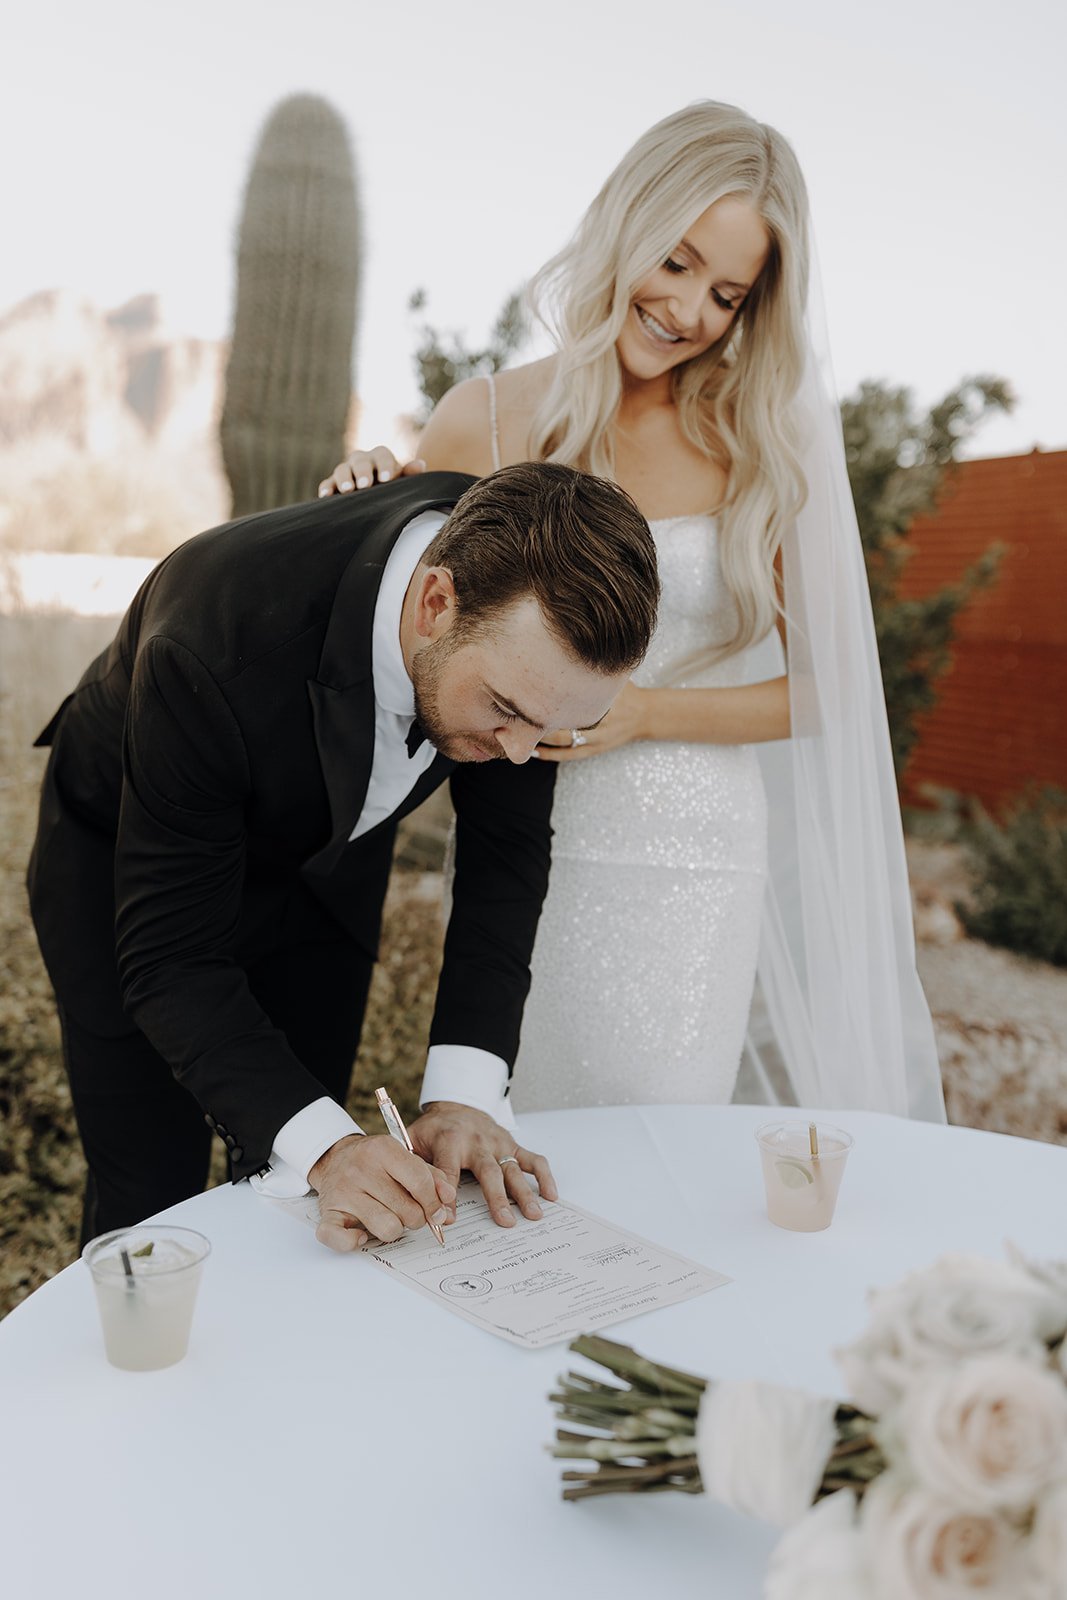 Groom signing marriage license while bride looks over his shoulder